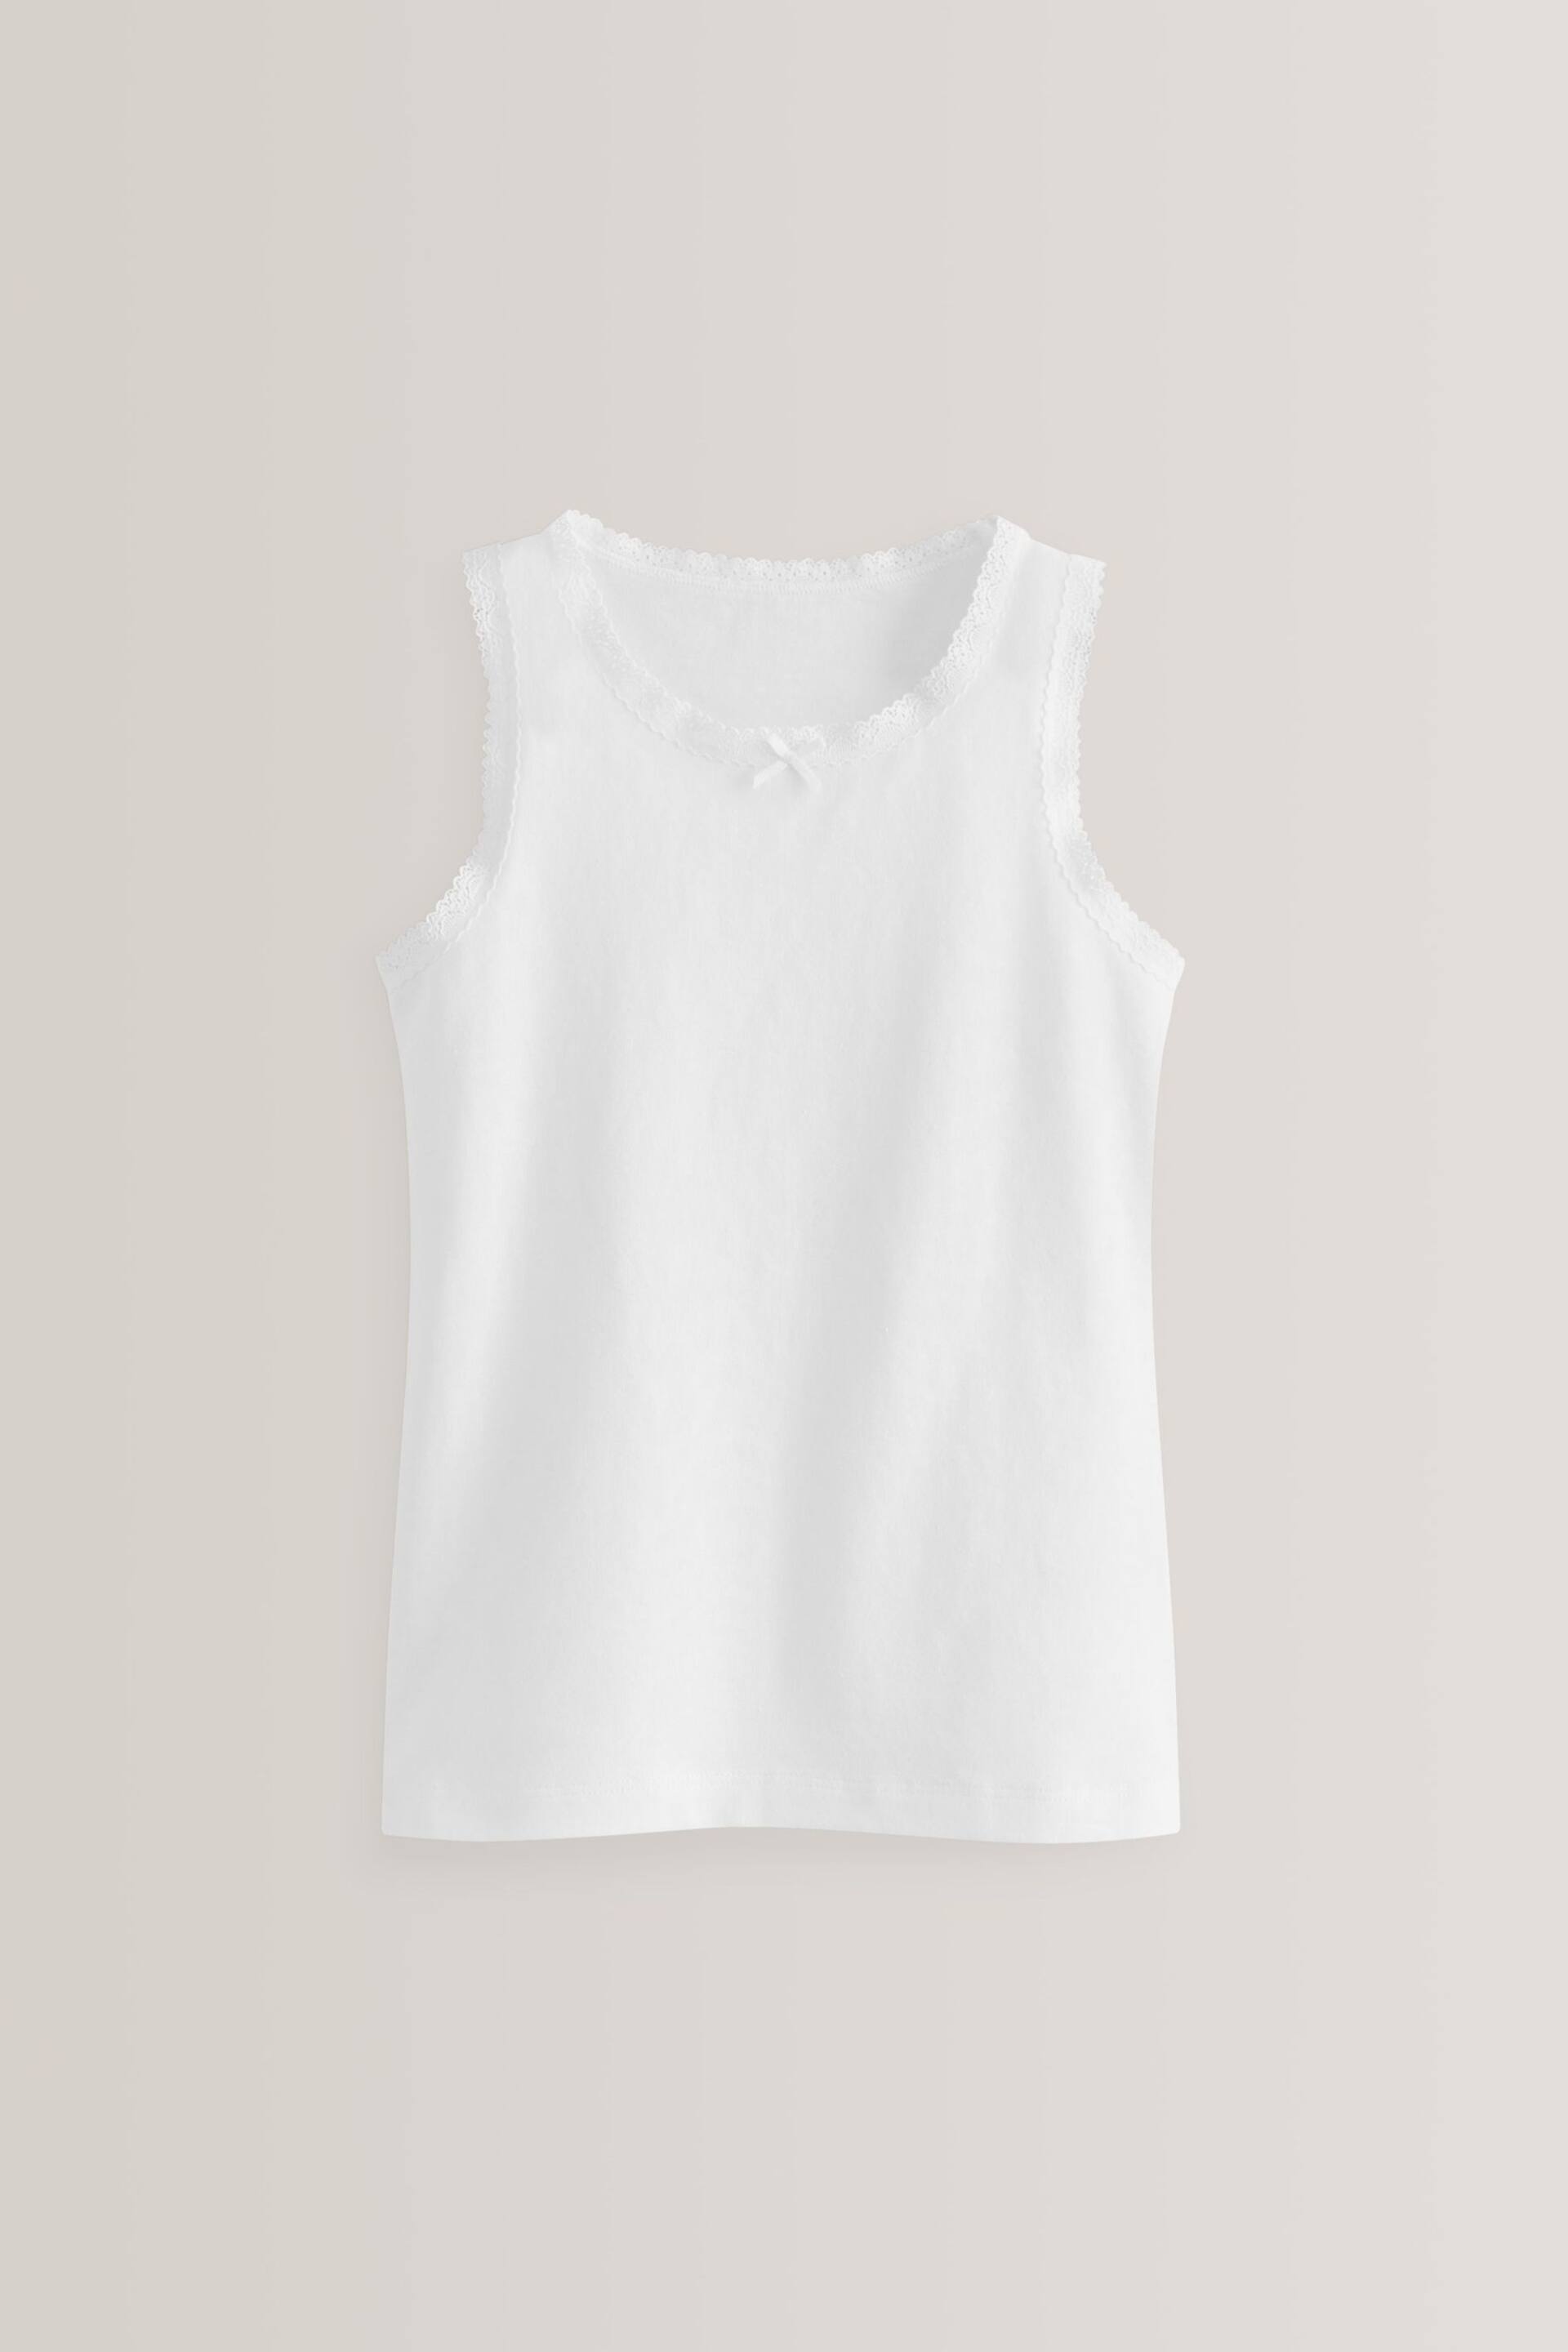 White Lace Vests 3 Pack (1.5-16yrs) - Image 2 of 3